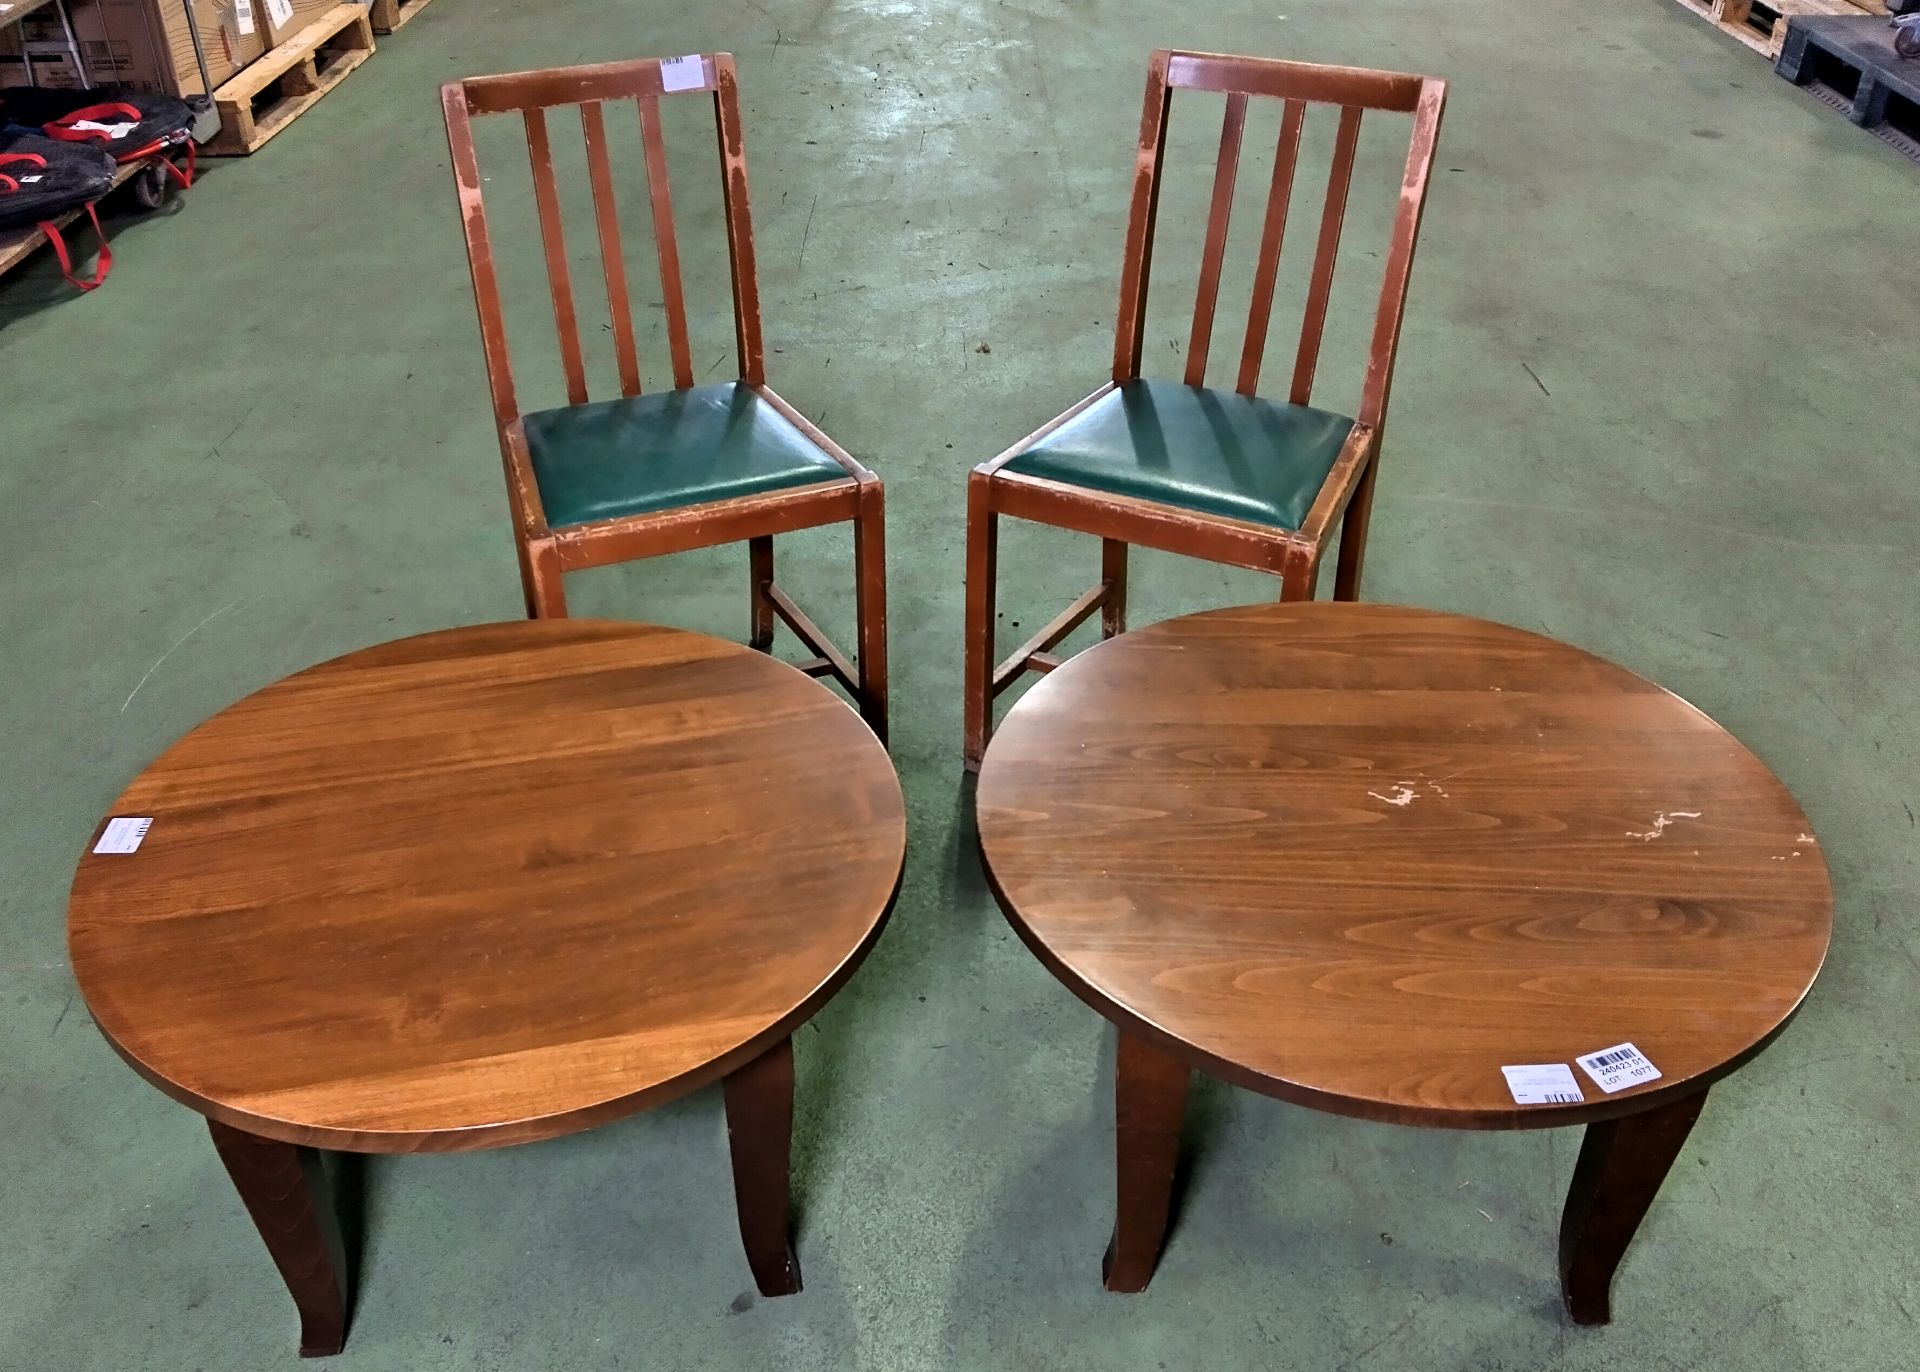 2x Small round coffee tables - W 75cm x H 43cm, 2x Wooden dining chairs - W 45 x D 39 x H 86cm